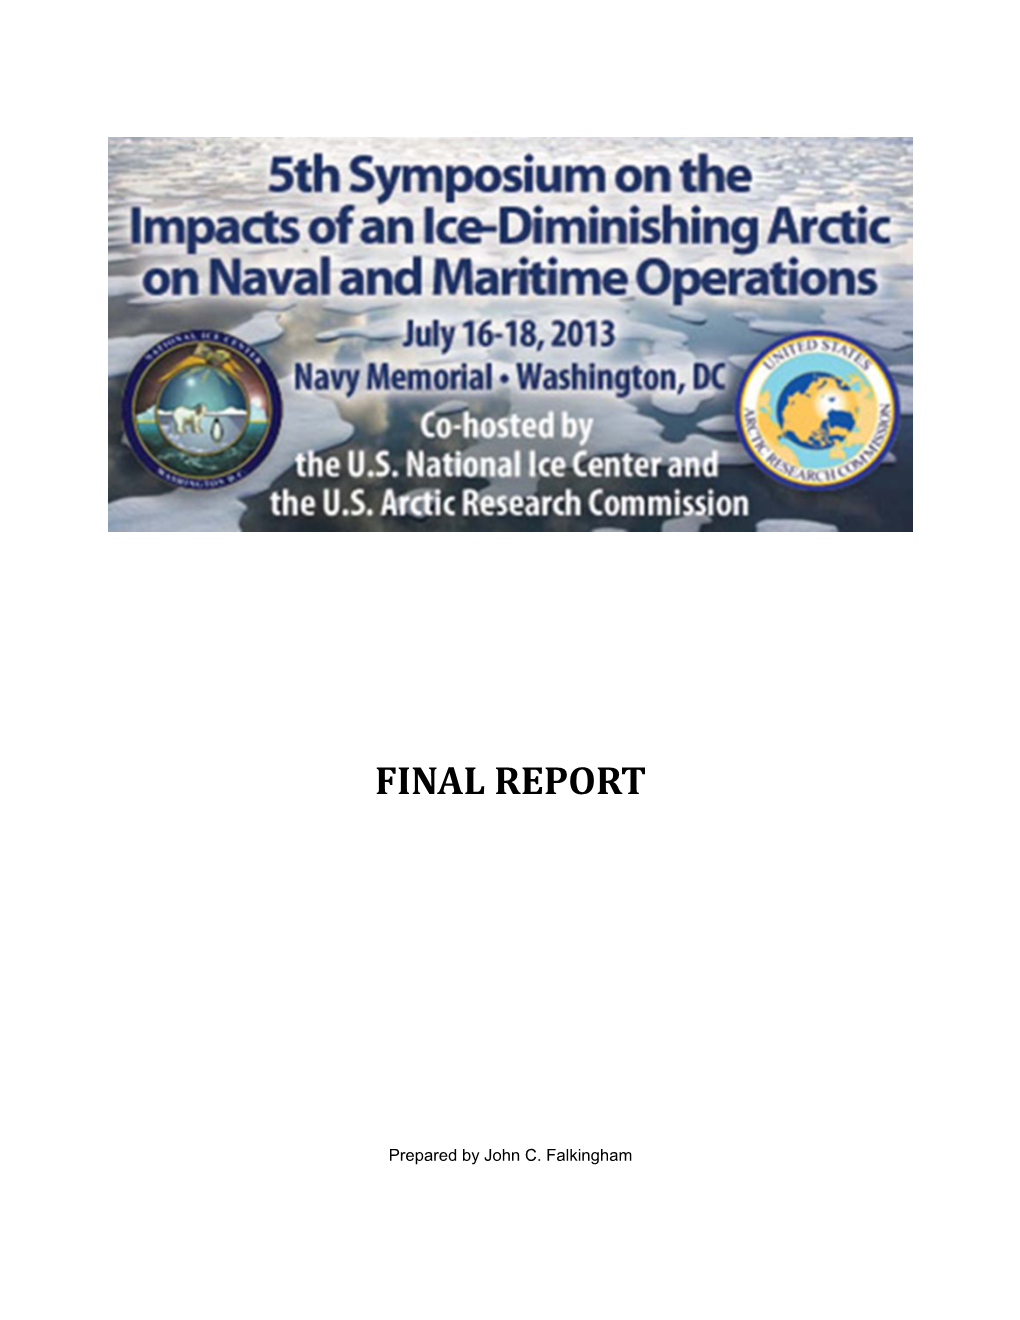 Final Report from the 5Th Symposium on an Ice-Diminishing Arctic